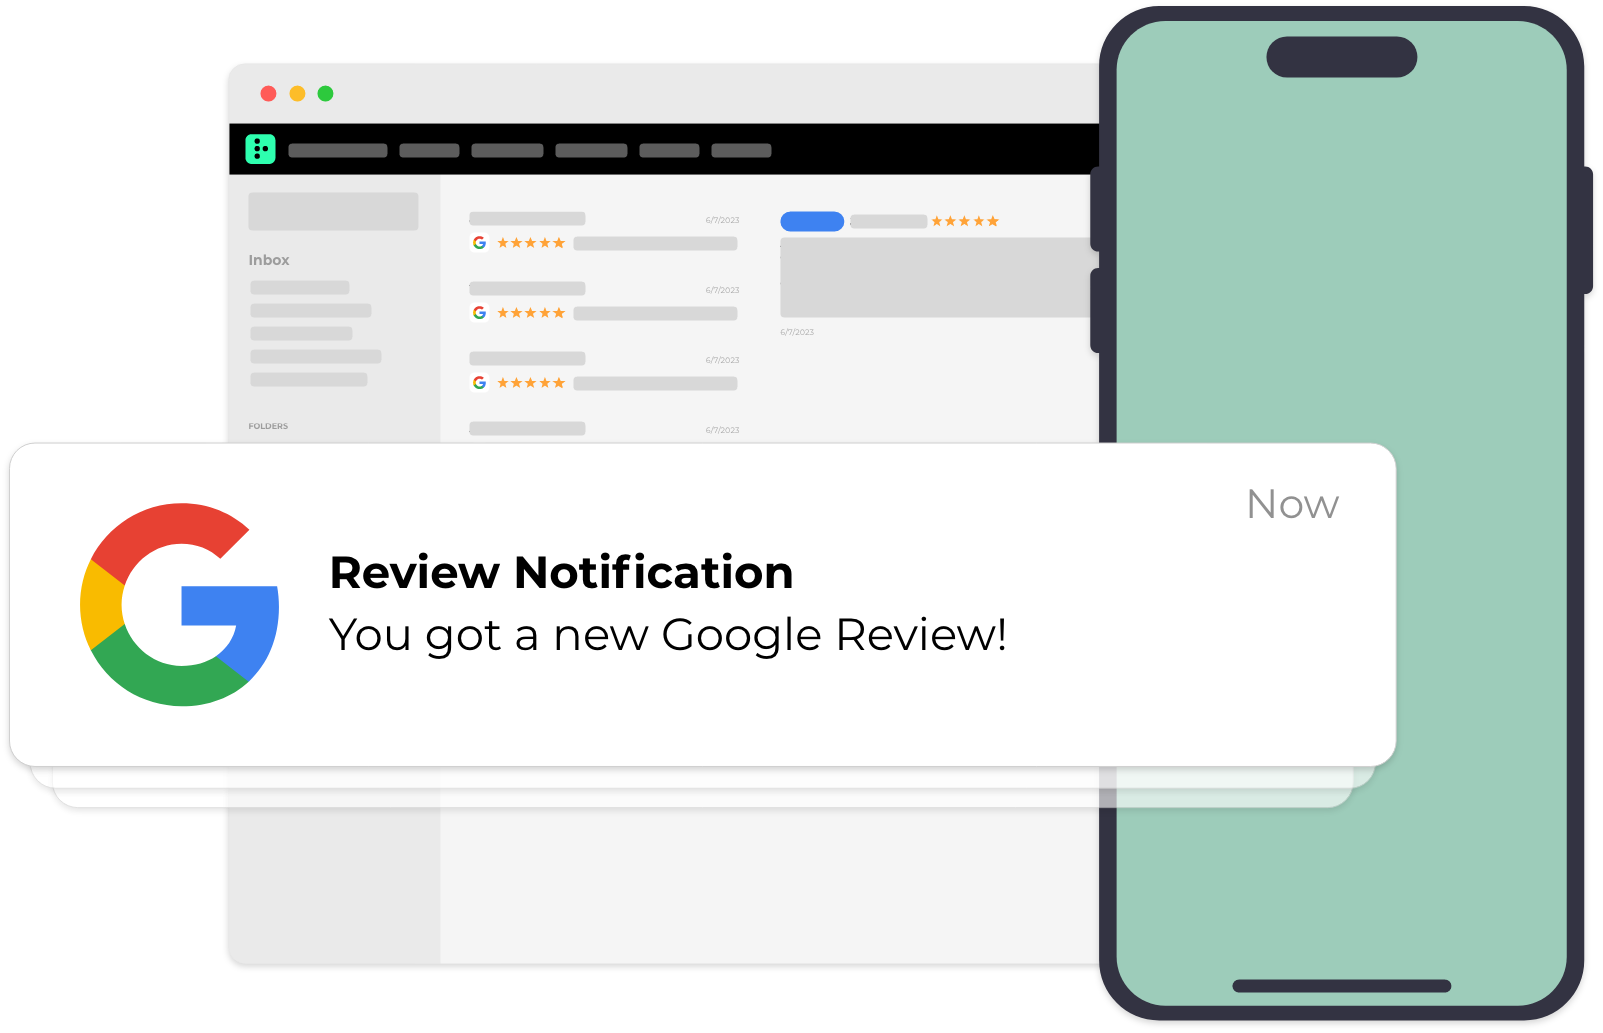 Real-time push and web notifications make it easy to see and respond to customers from the desktop and the Reveo Mobile App. Never miss an important notification from a customer again.